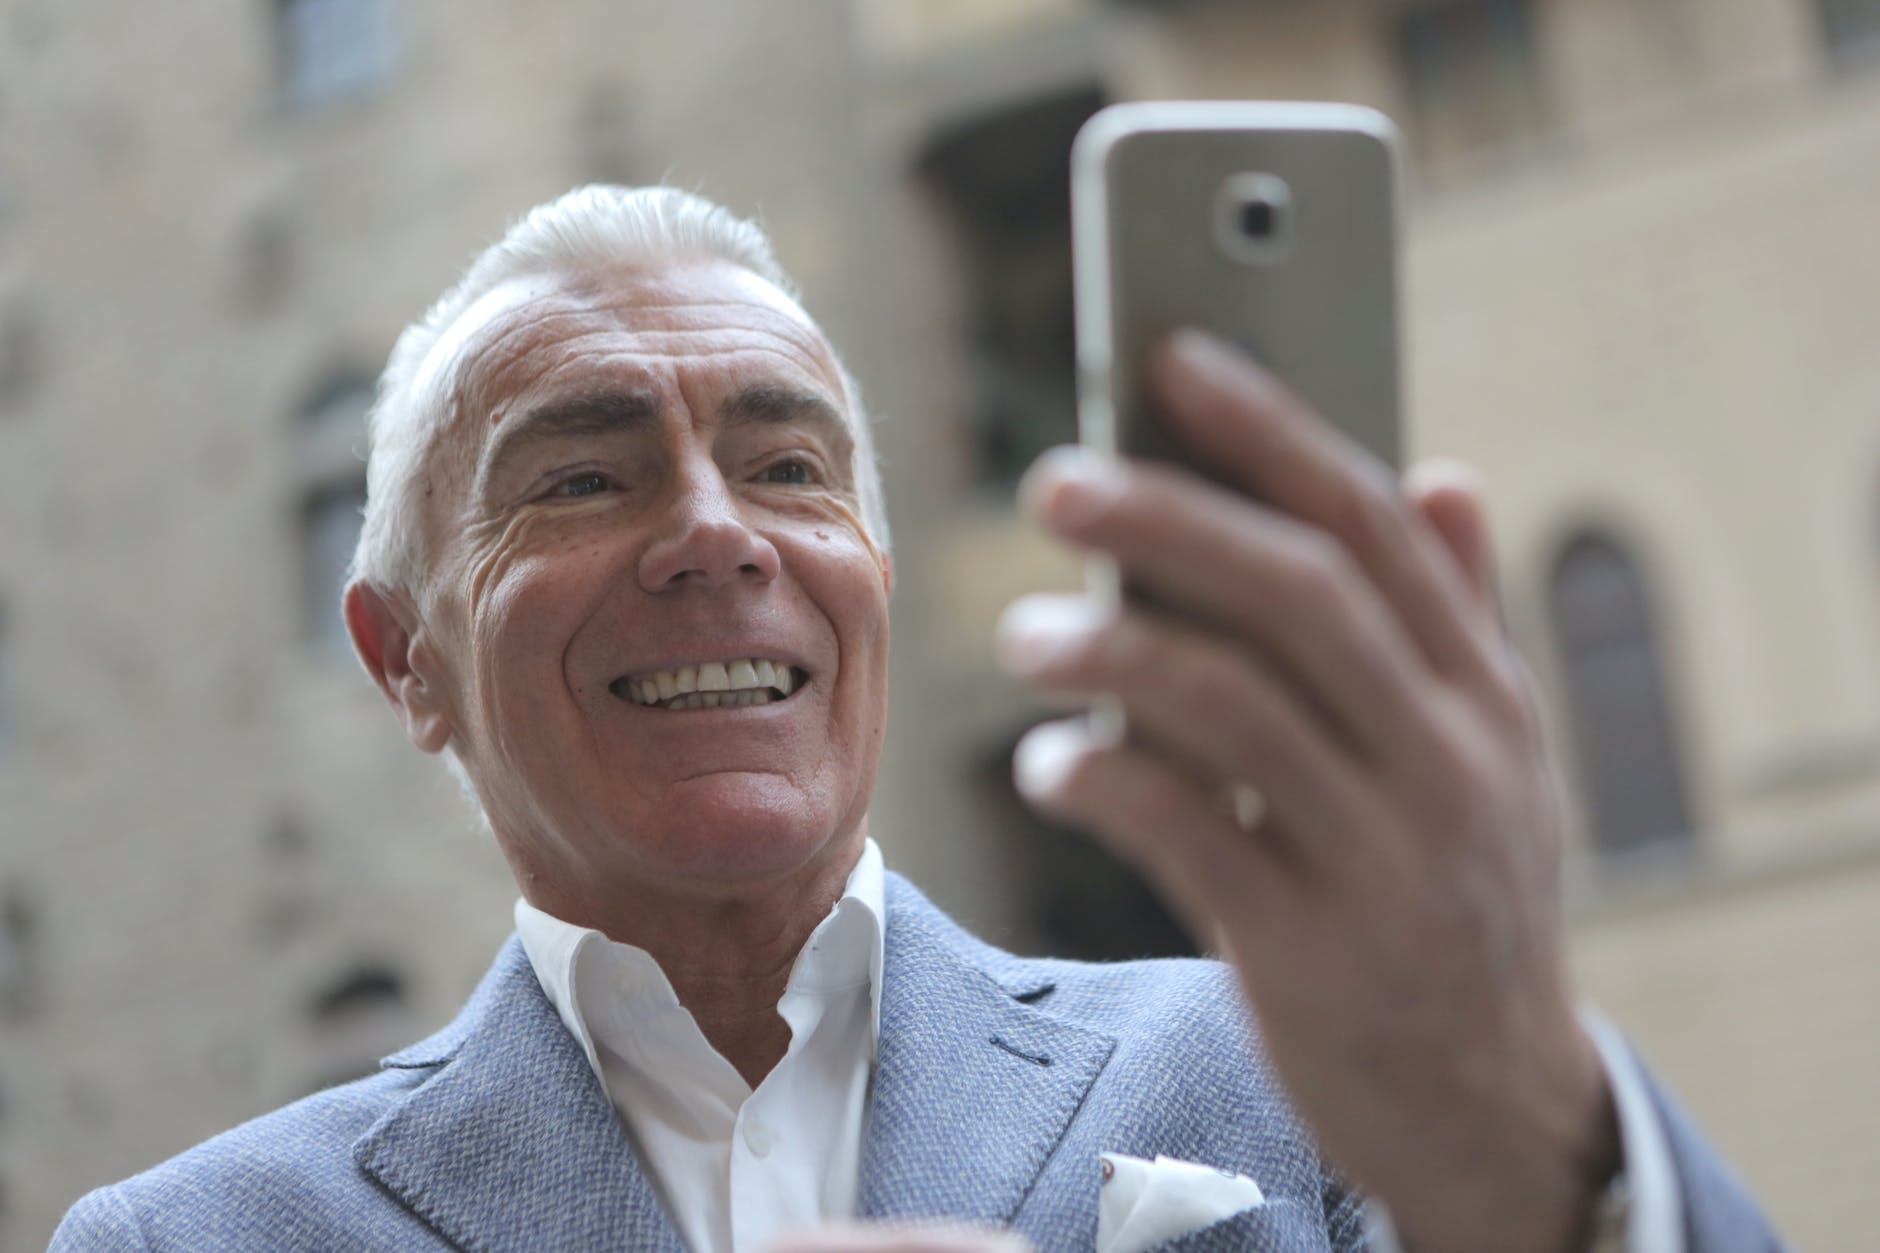 man in gray suit jacket holding smartphone